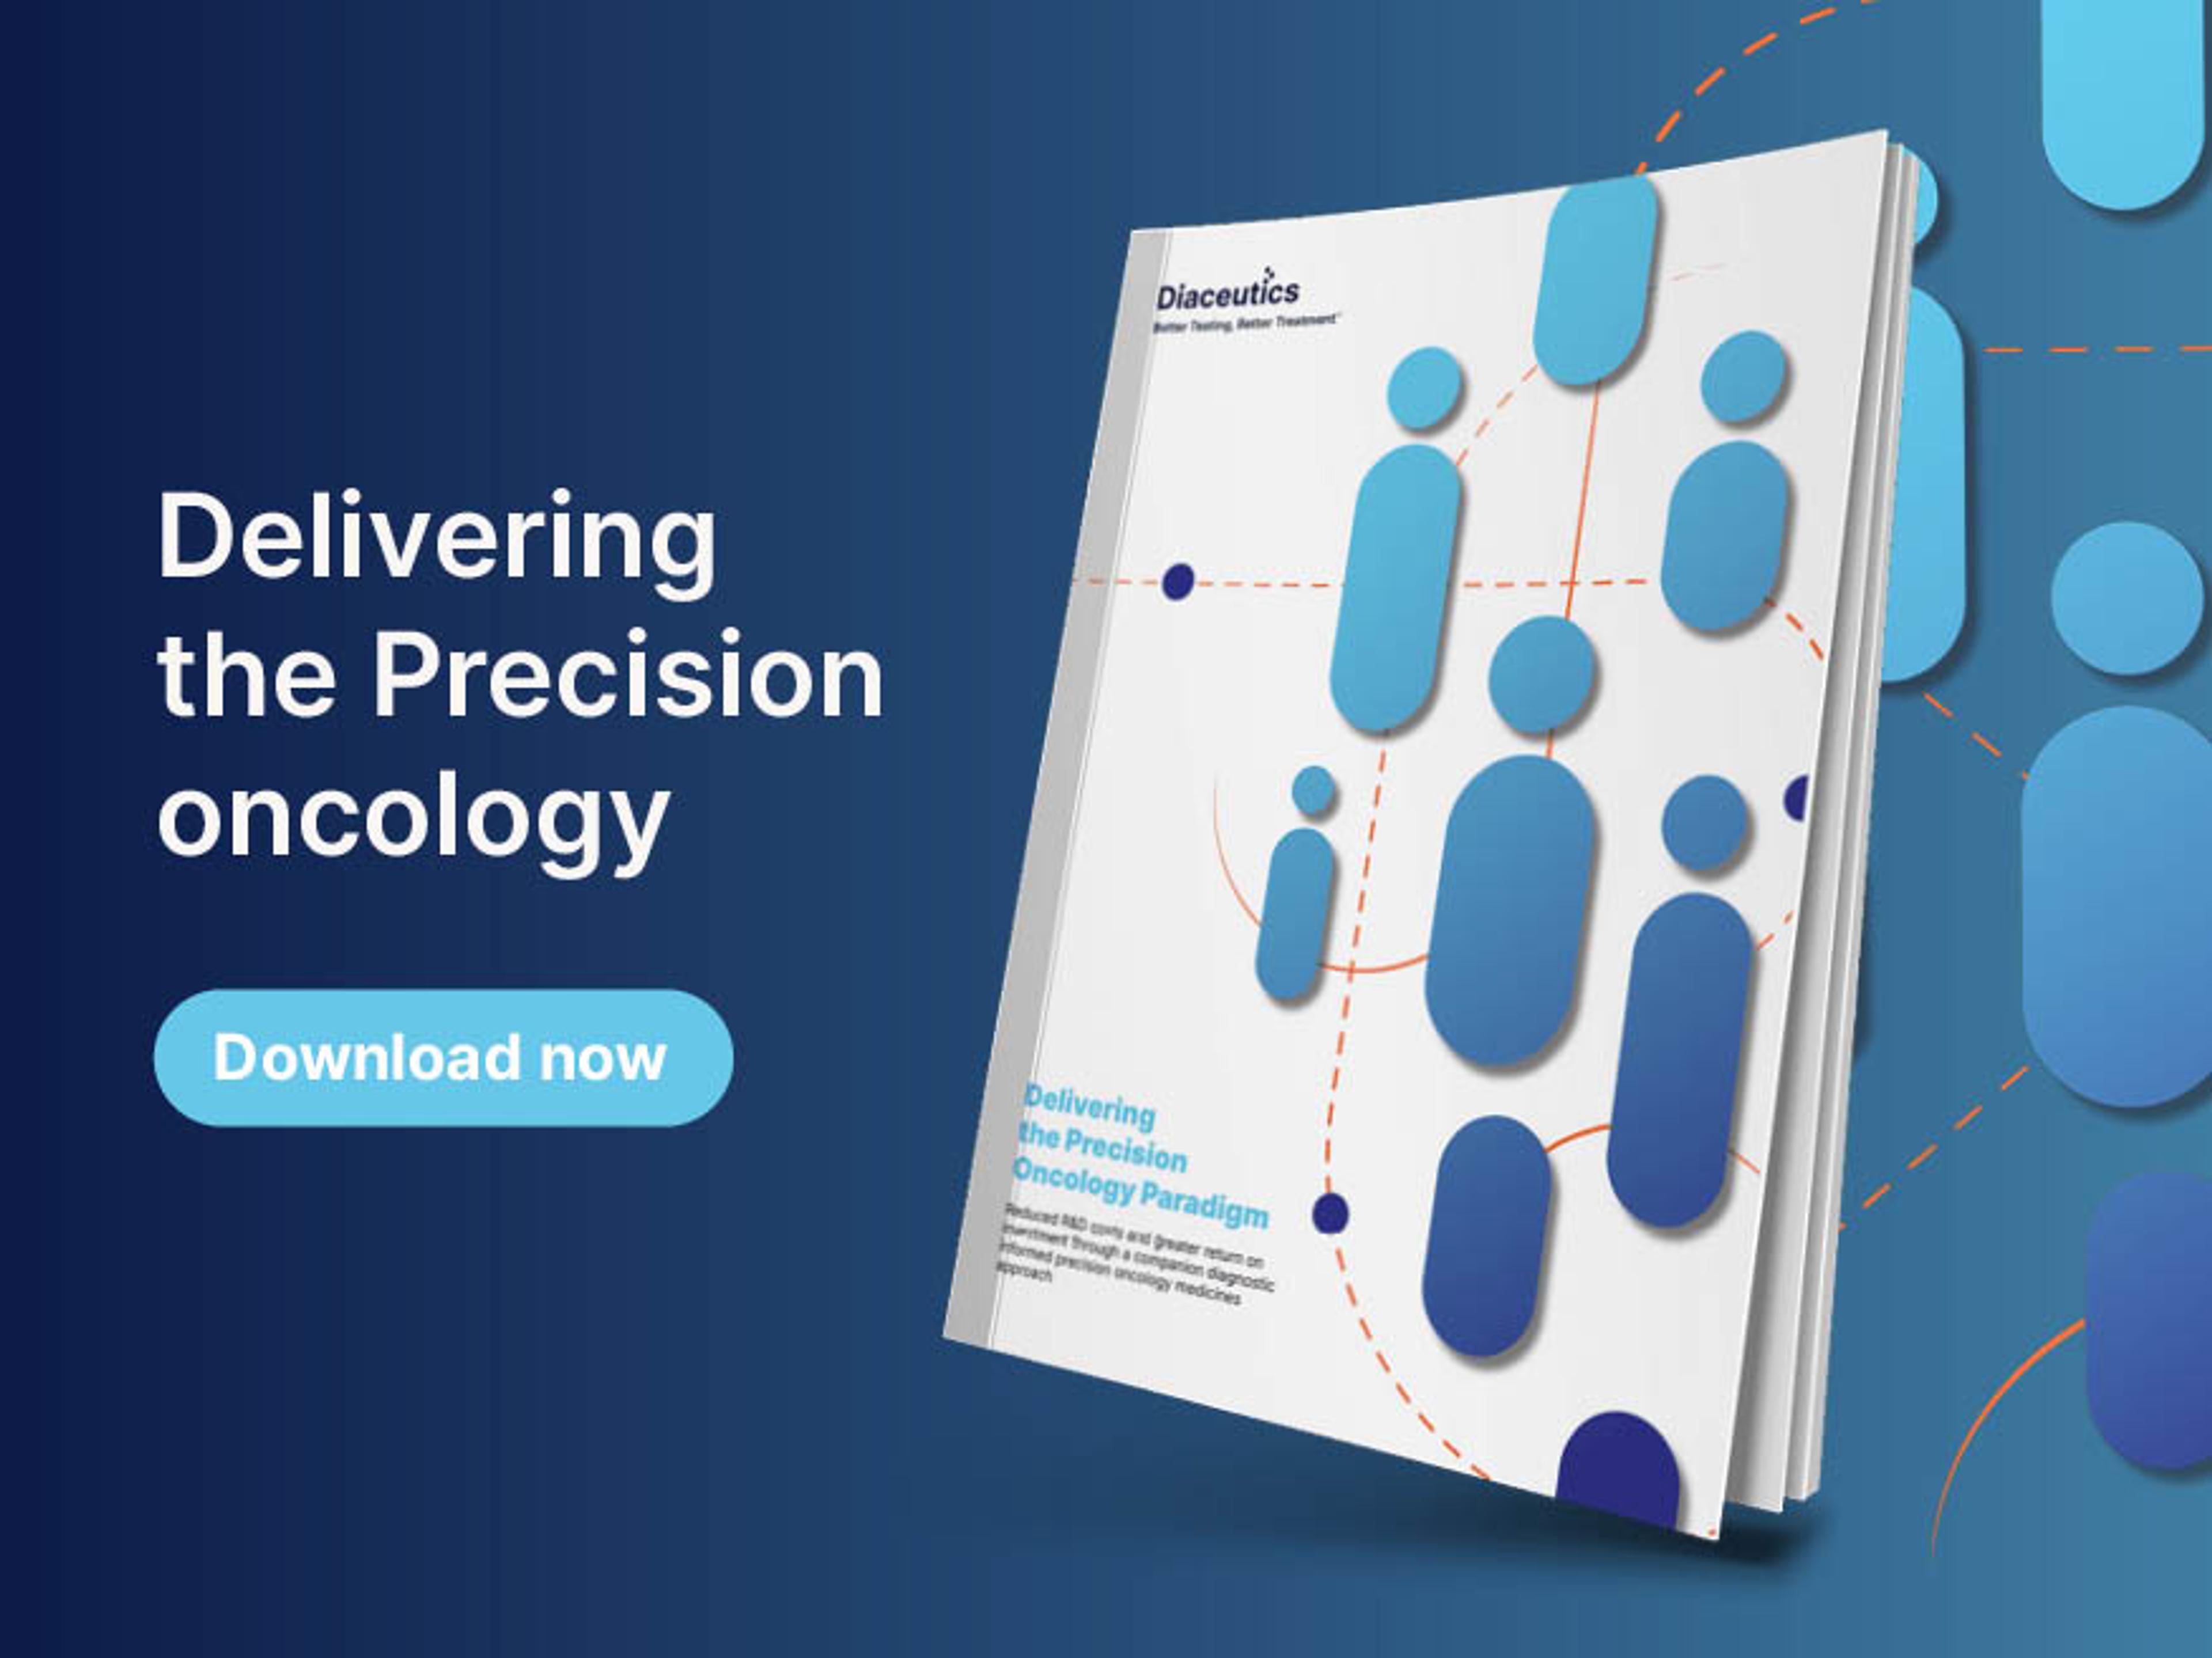 Delivering the Precision Oncology Paradigm